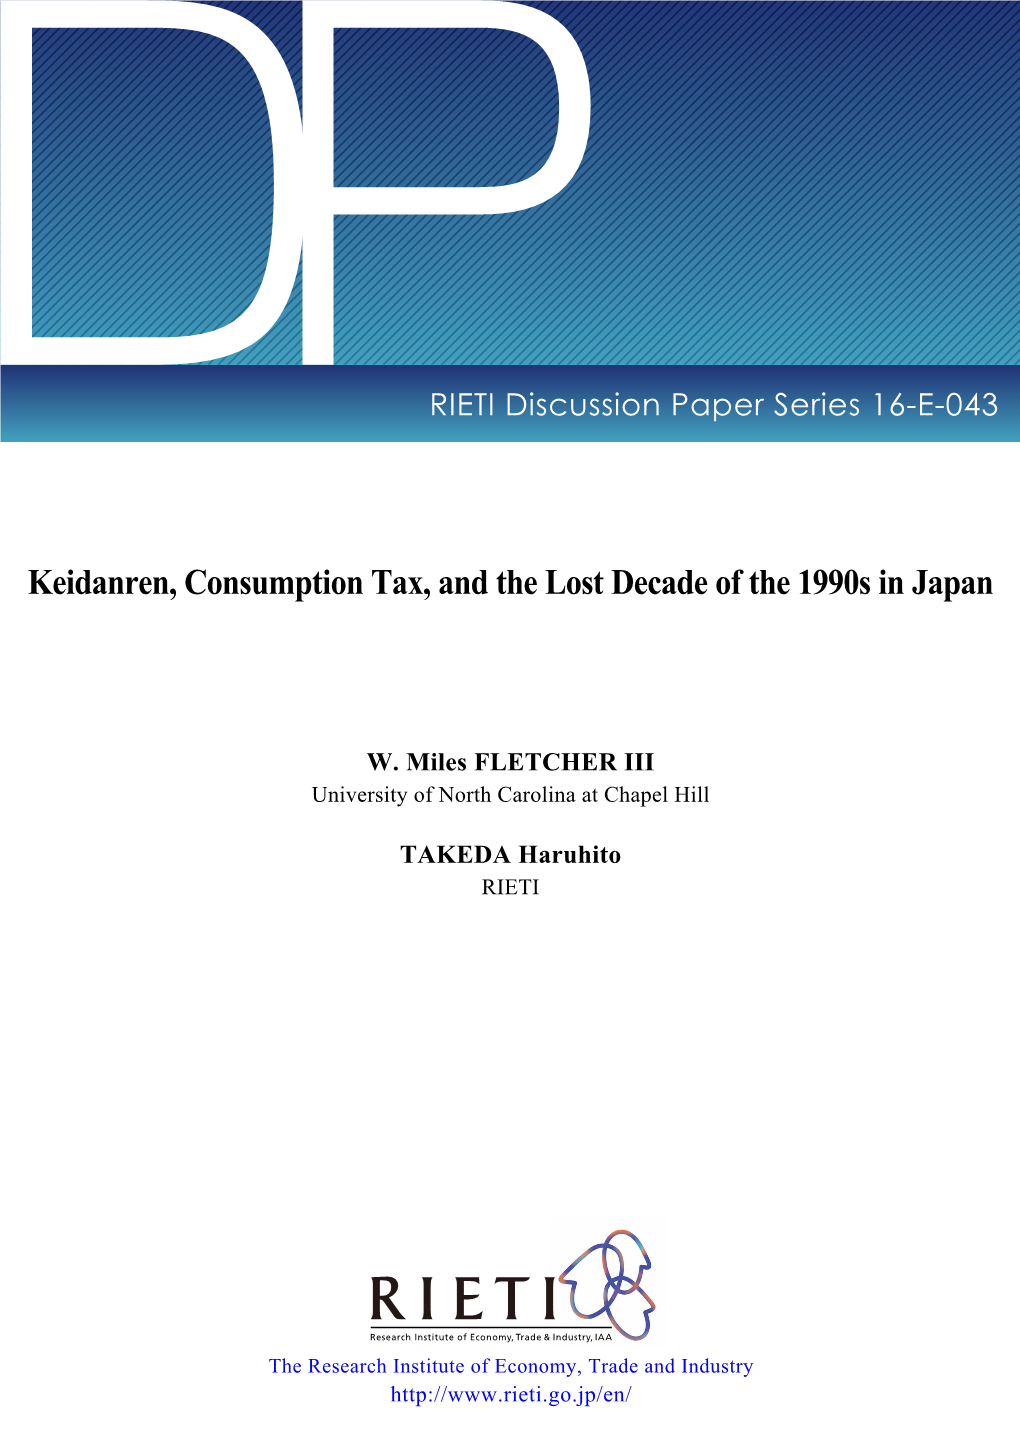 Keidanren, Consumption Tax, and the Lost Decade of the 1990S in Japan